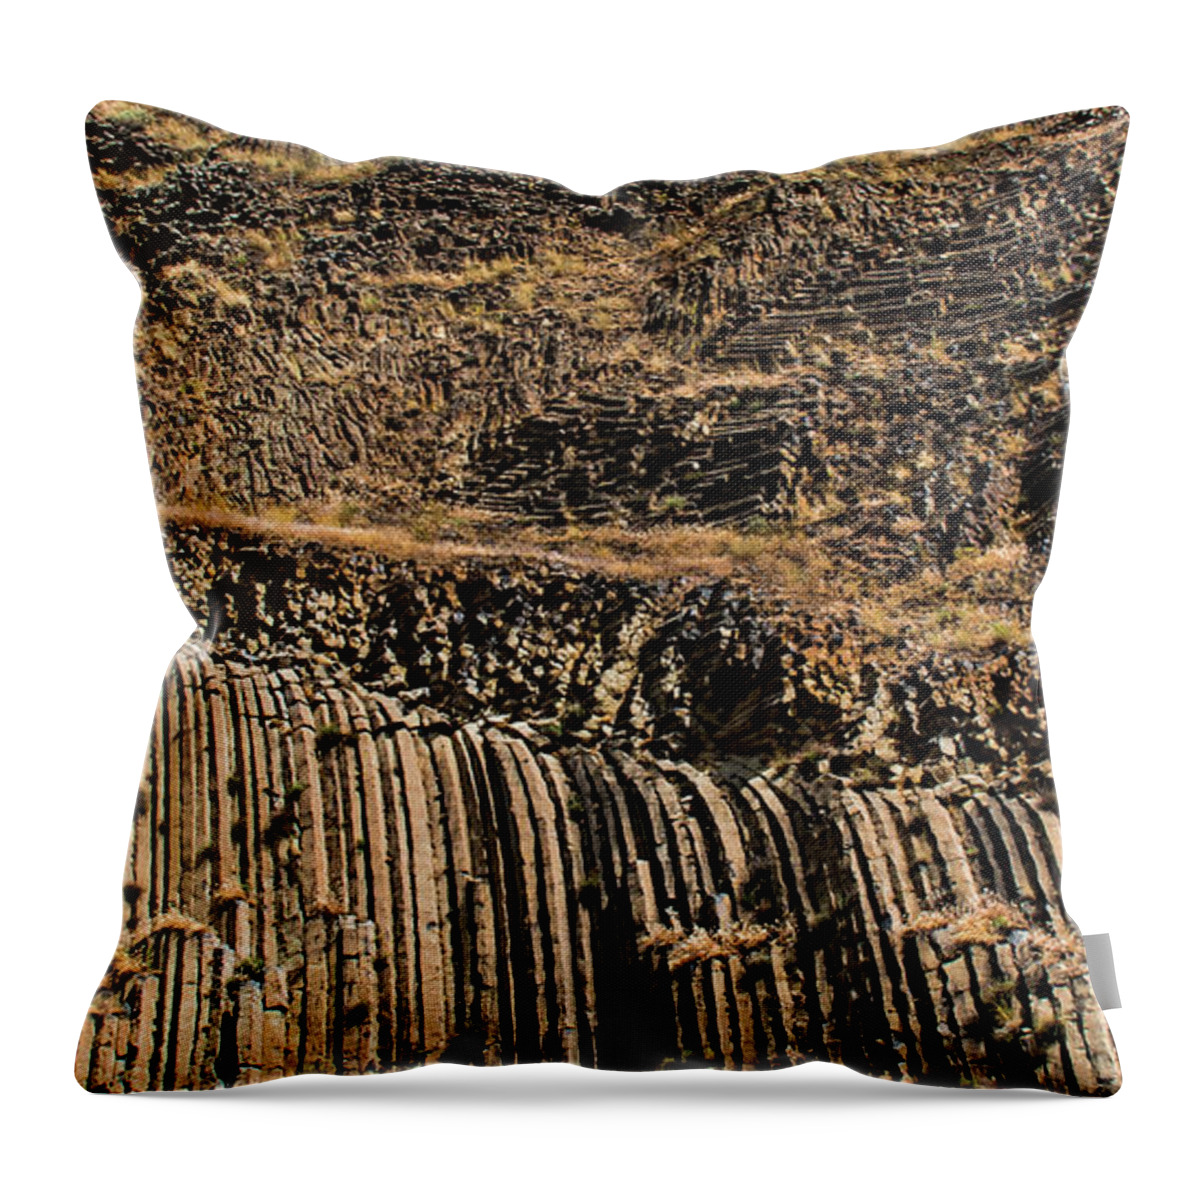 2016 Throw Pillow featuring the photograph Rock Mountain Rock Art by Kaylyn Franks by Kaylyn Franks